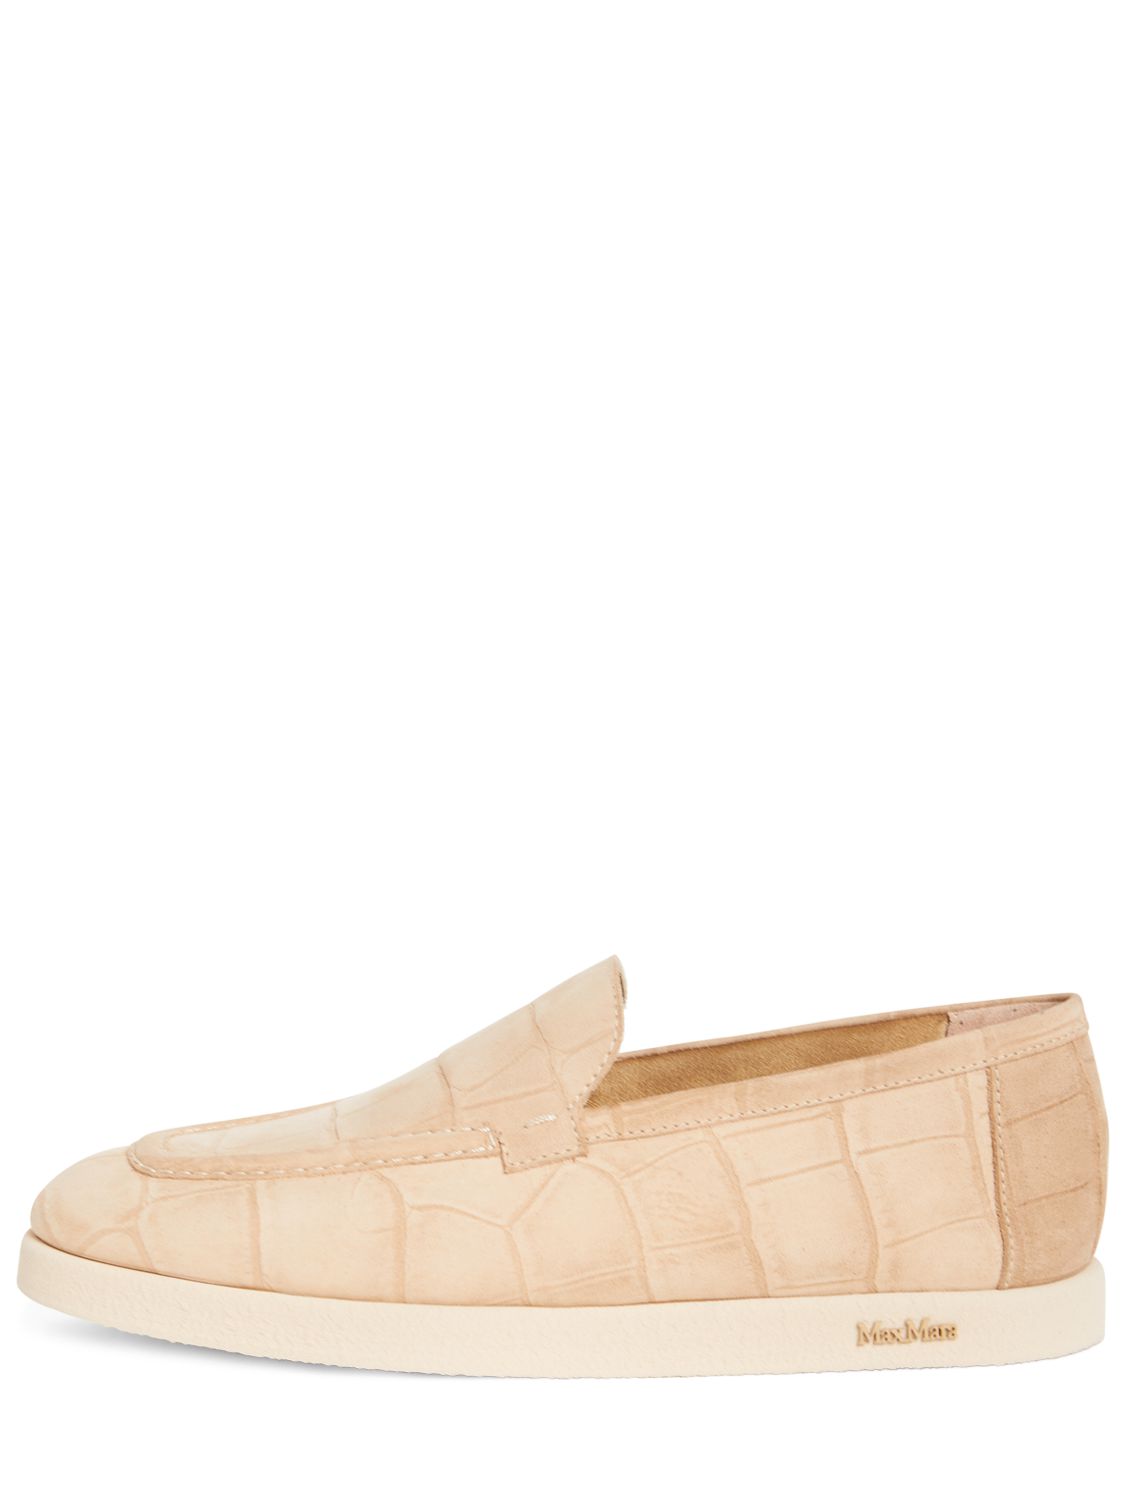 Max Mara 10mm Cocco Print Leather Loafers In Beige